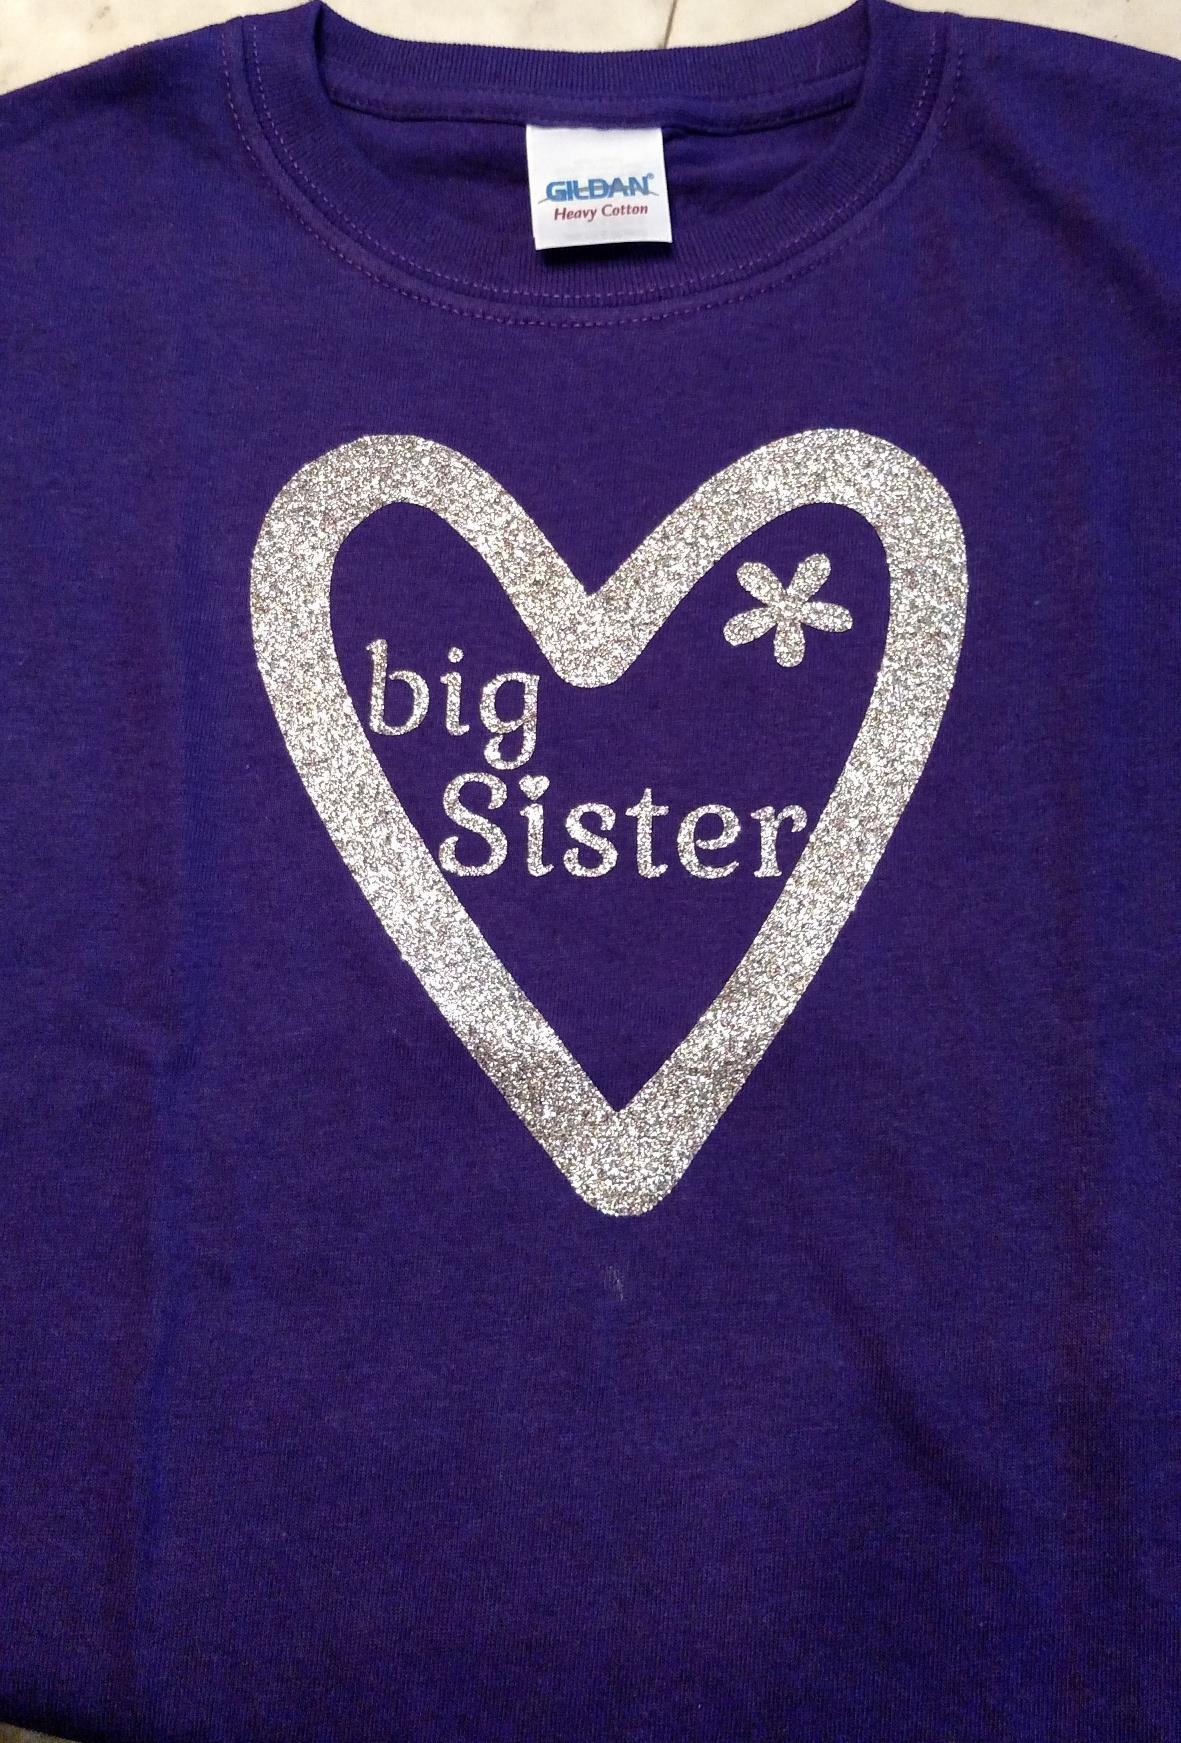 Purple custom youth  tee with glitter heart and big sister